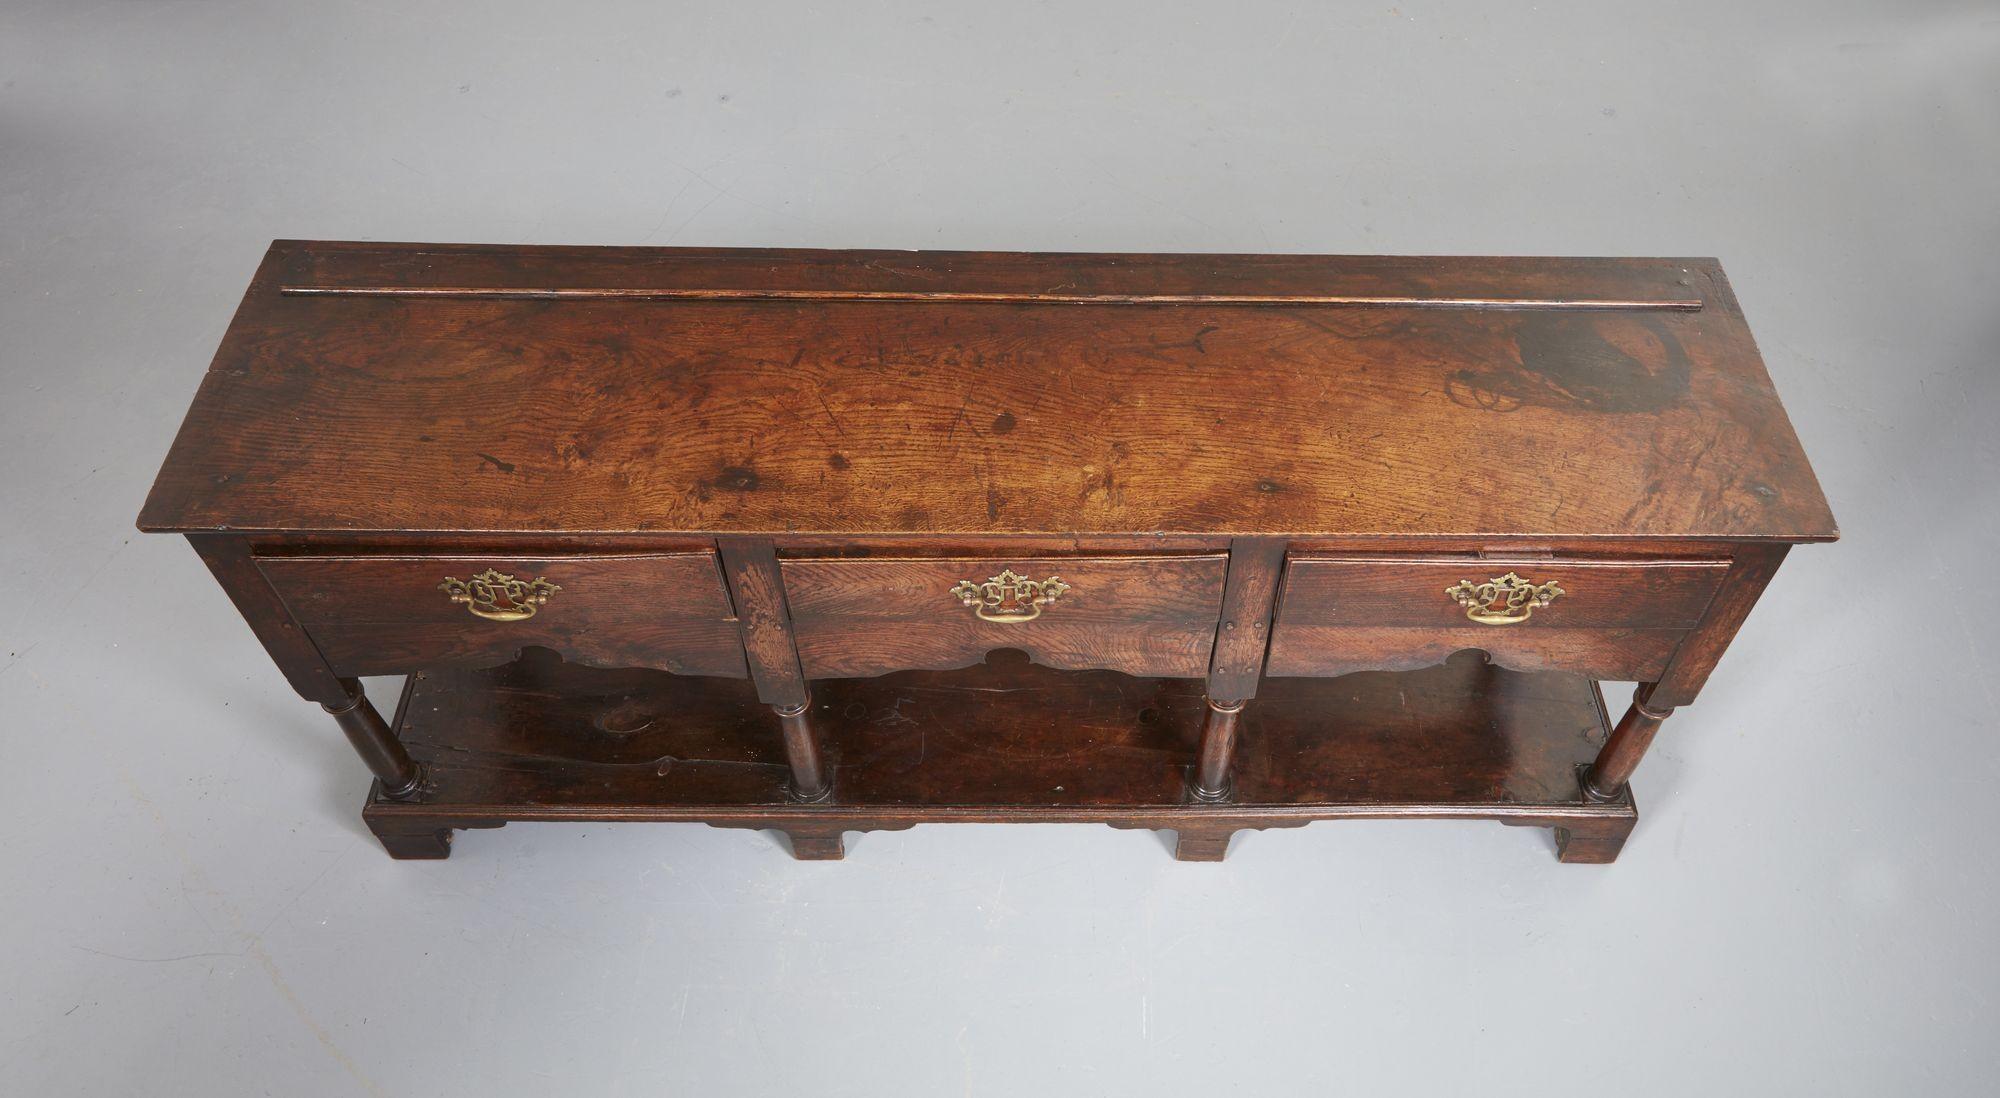 Late 18th Century 18th c. English Low Dresser with Potboard Base For Sale